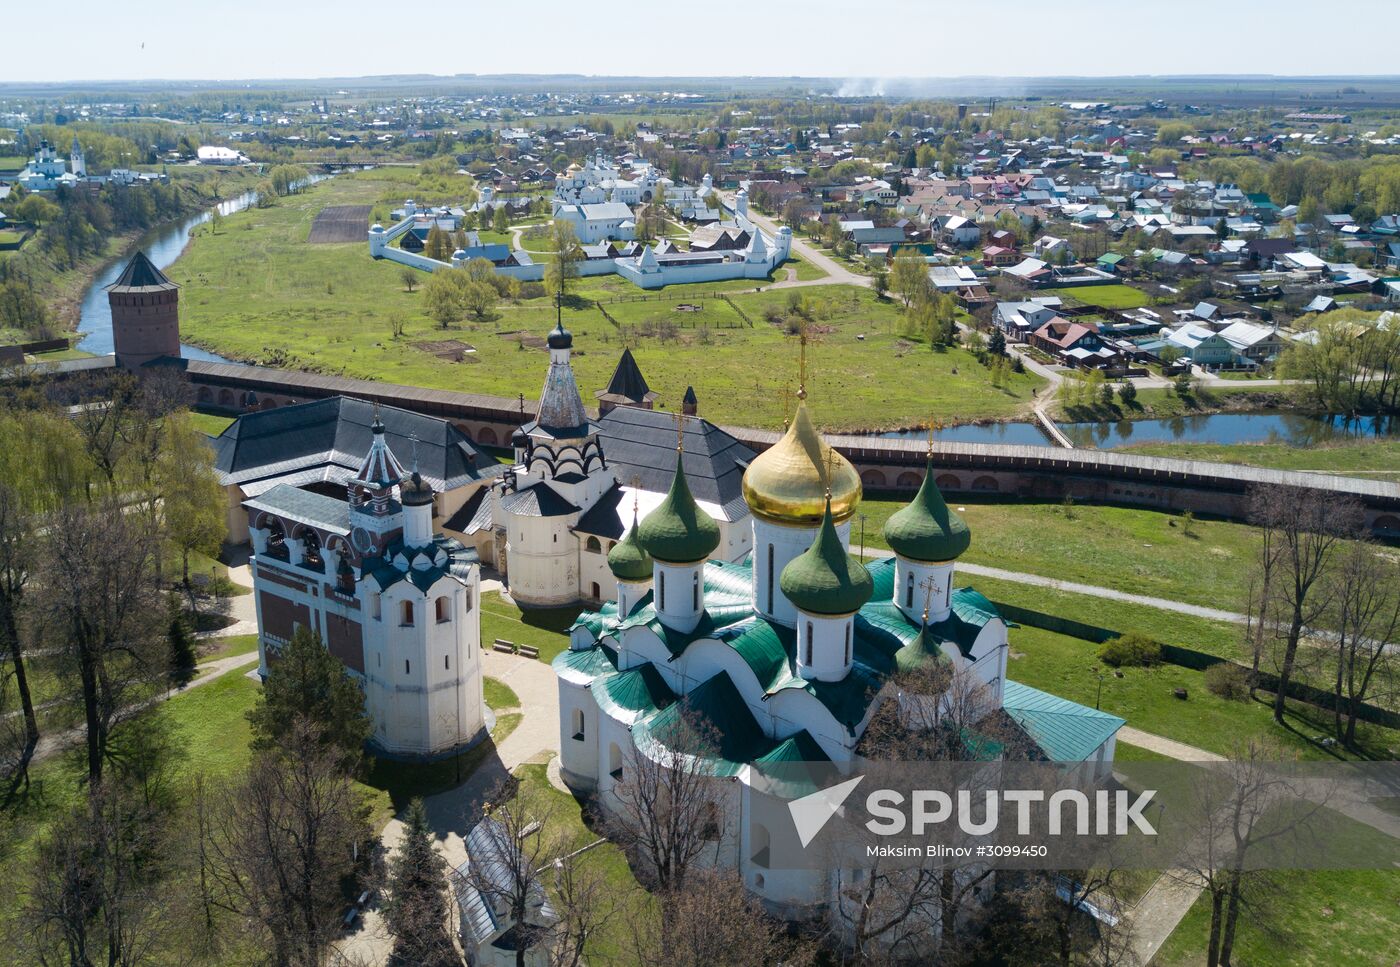 Cities of Russia. Suzdal